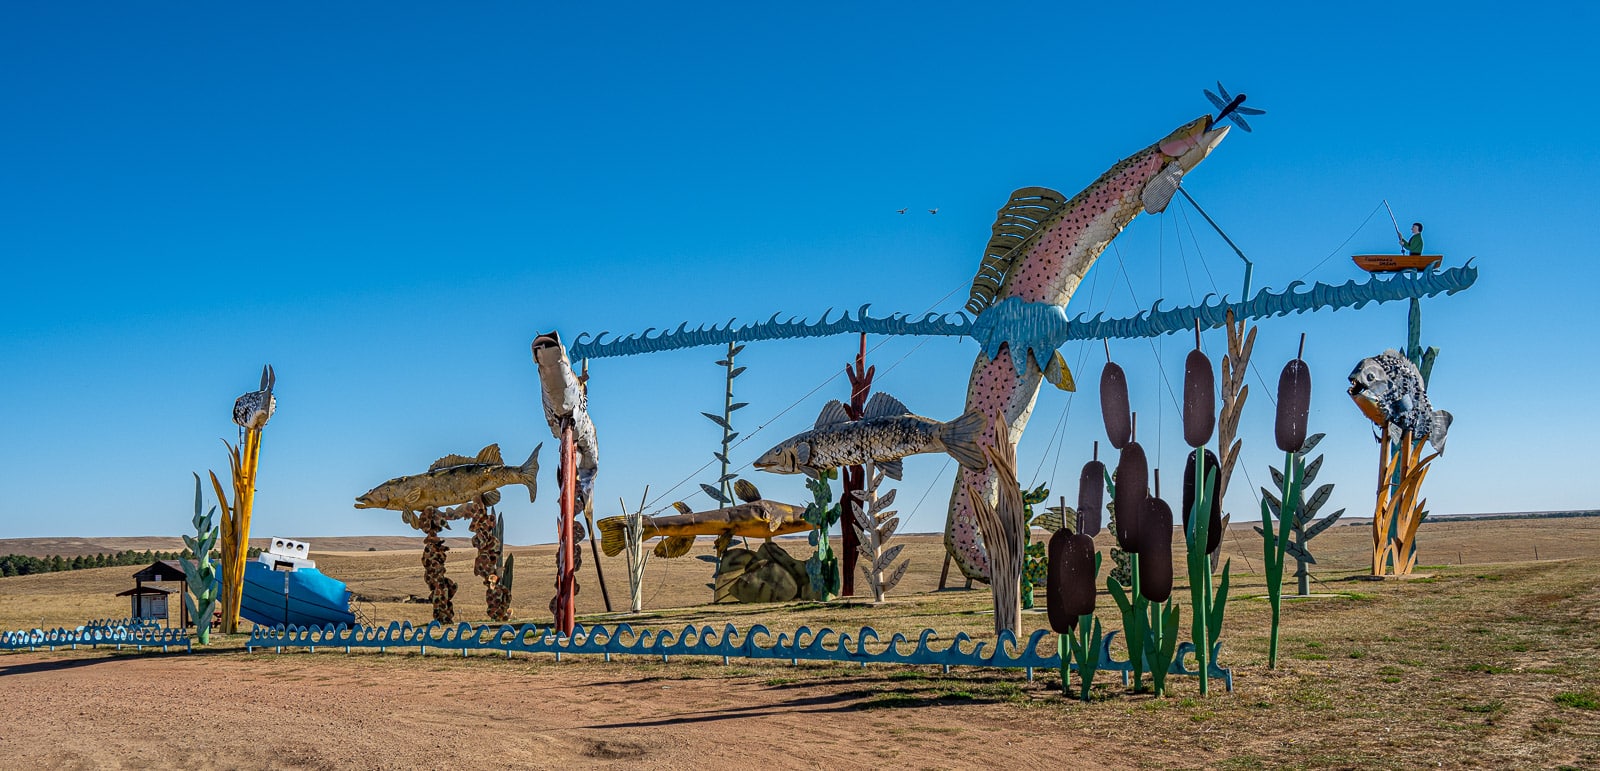 This is an overview of the sculpture by Gary Greff, called Fisherman's Dream. It is located along the Enchanted Highway, between I-94 and Regent, North Dakota.